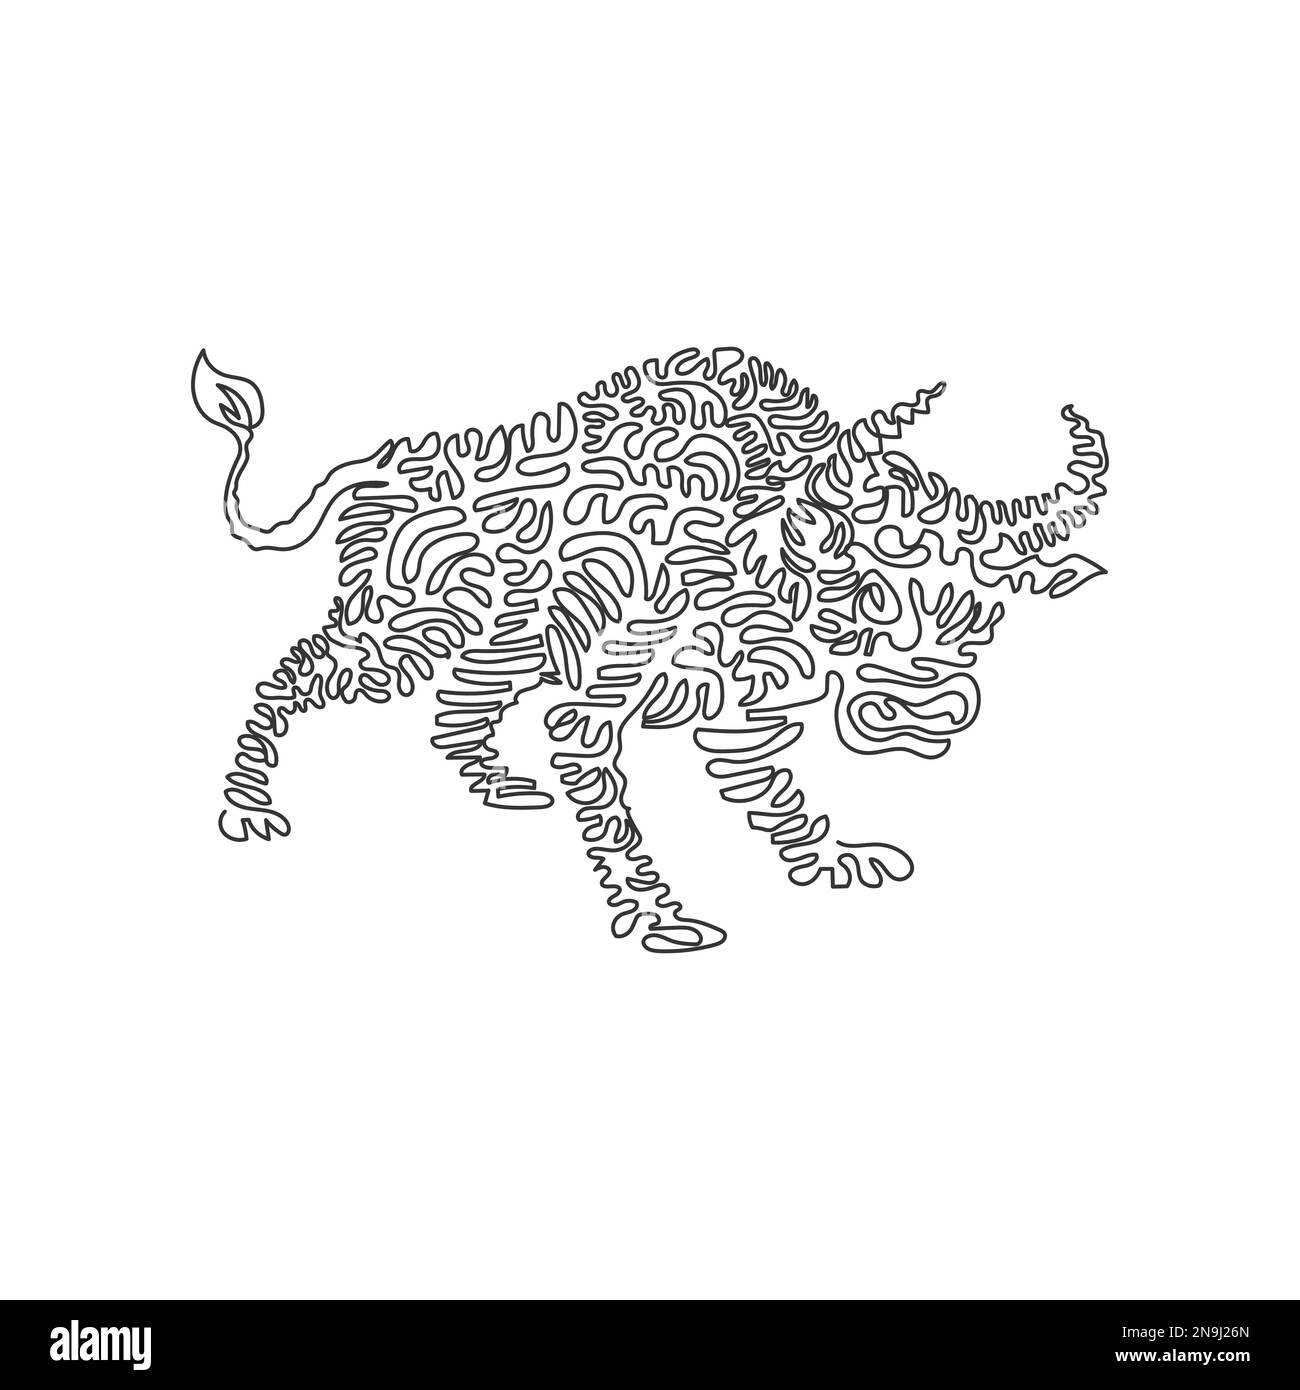 Single one line drawing of horns bulls abstract art. Continuous line drawing graphic design vector illustration of aggressive bulls for icon, symbol Stock Vector